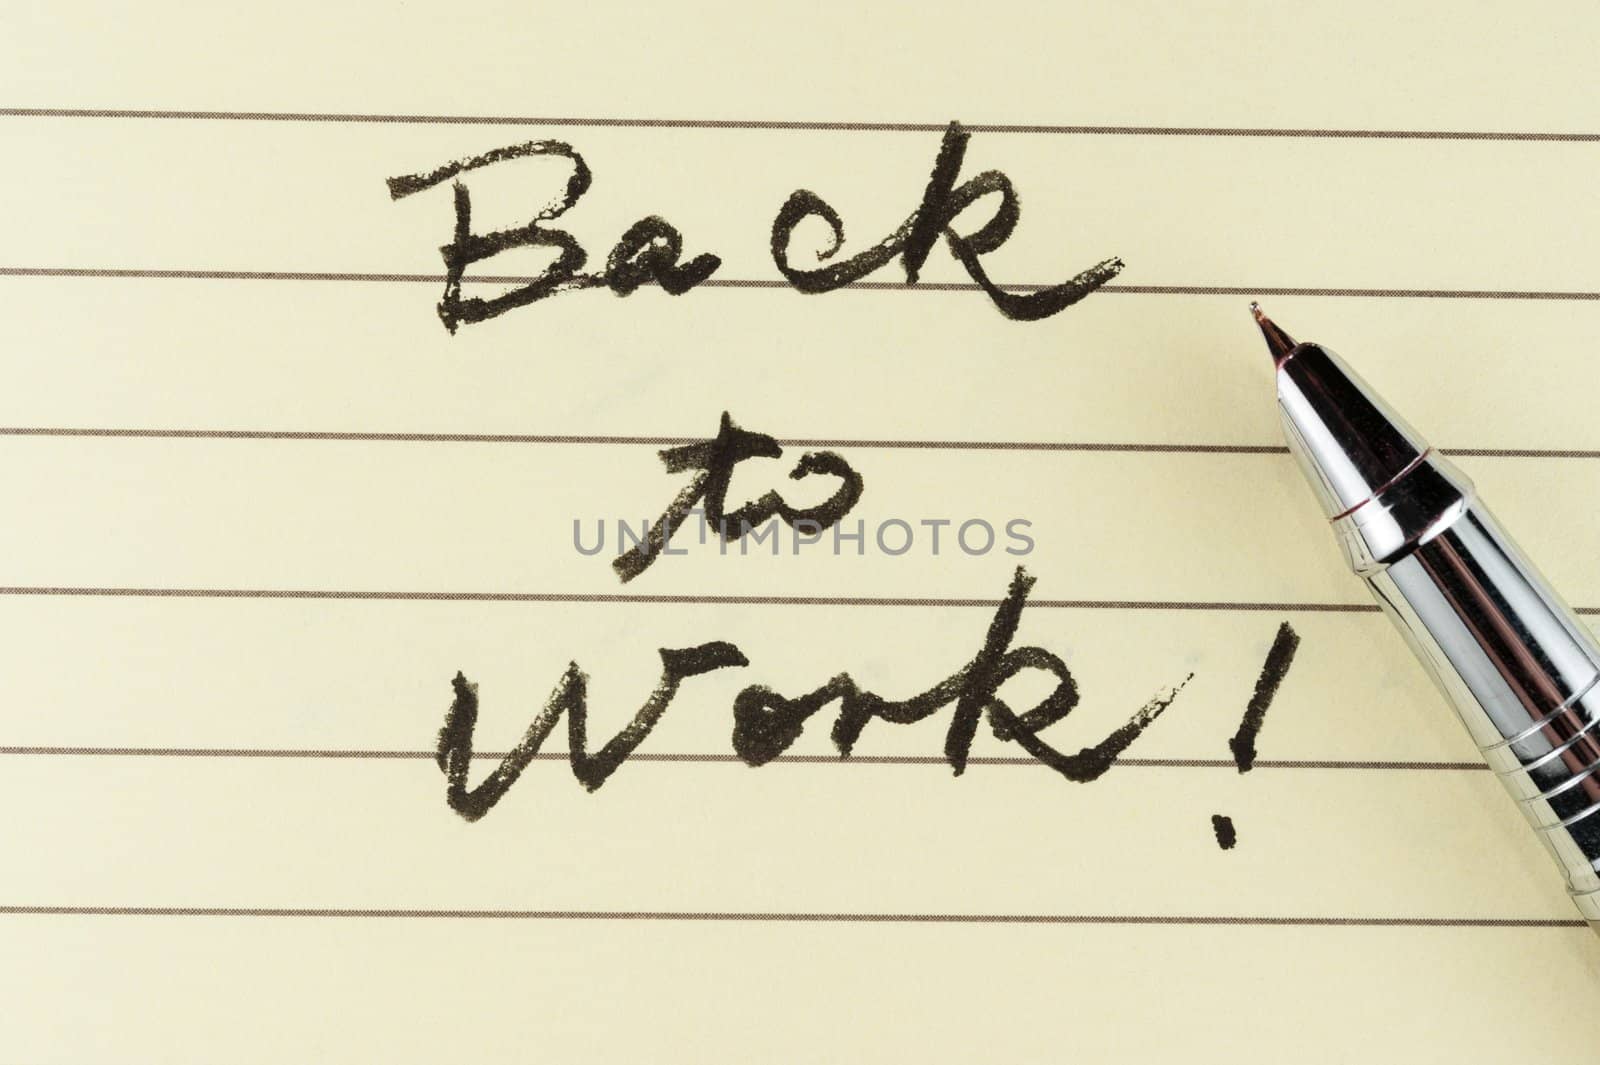 Back to work words written on lined paper with a pen on it